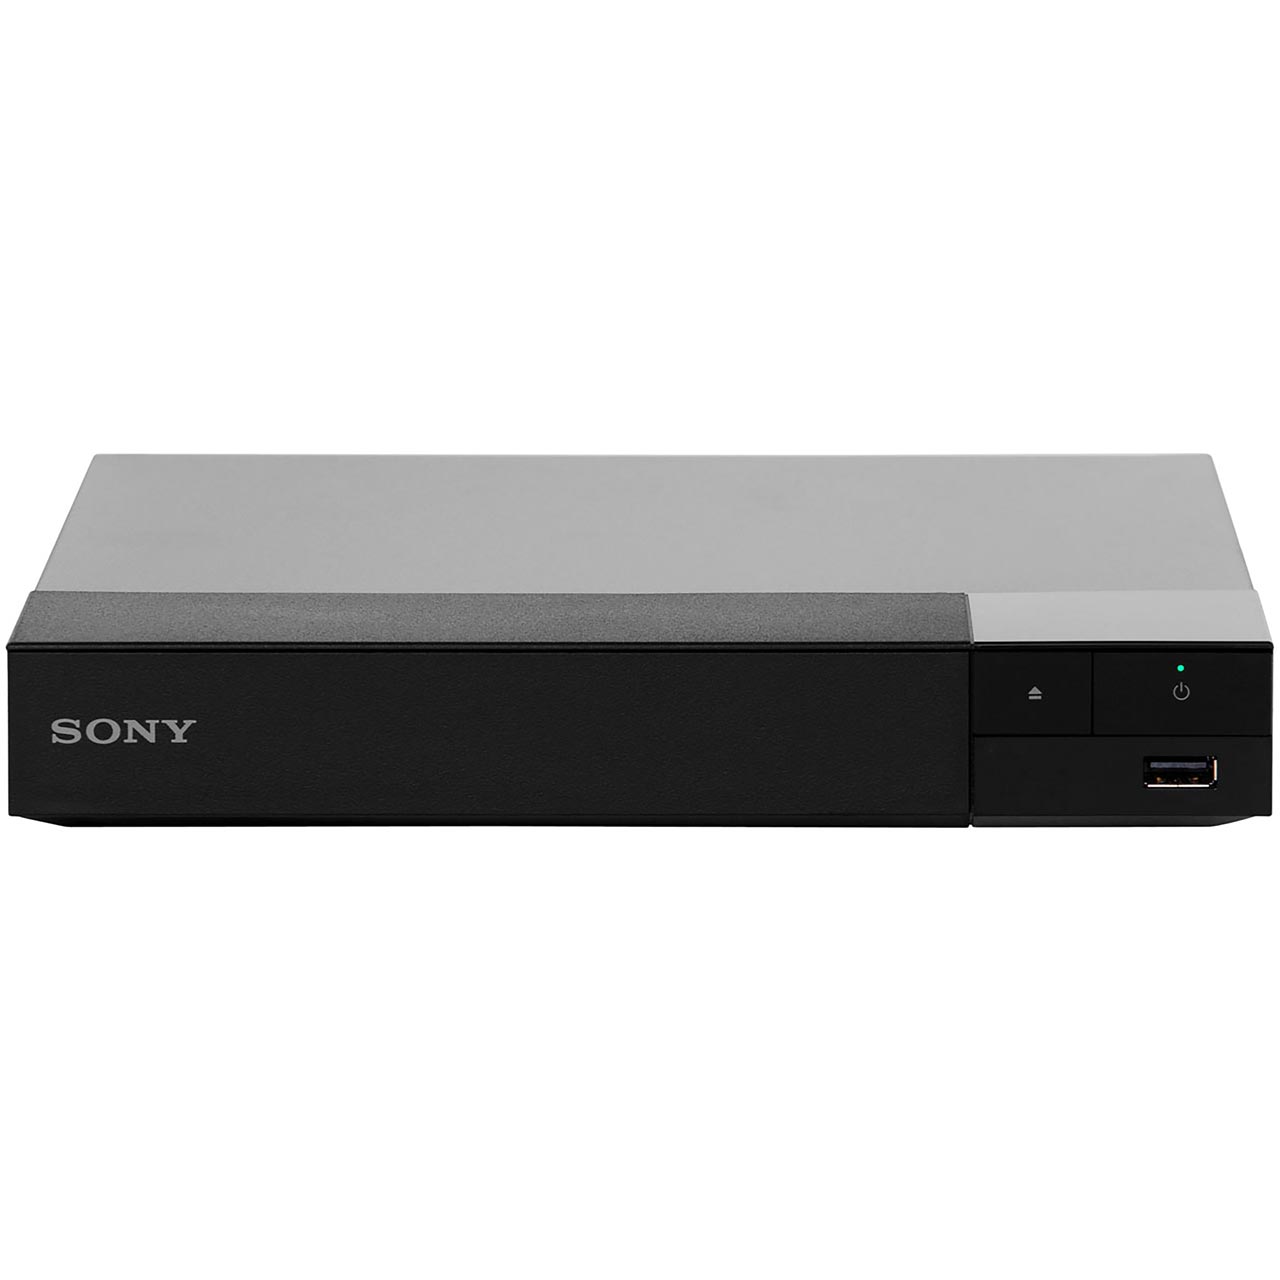 Sony Smart Blu-ray Player Review